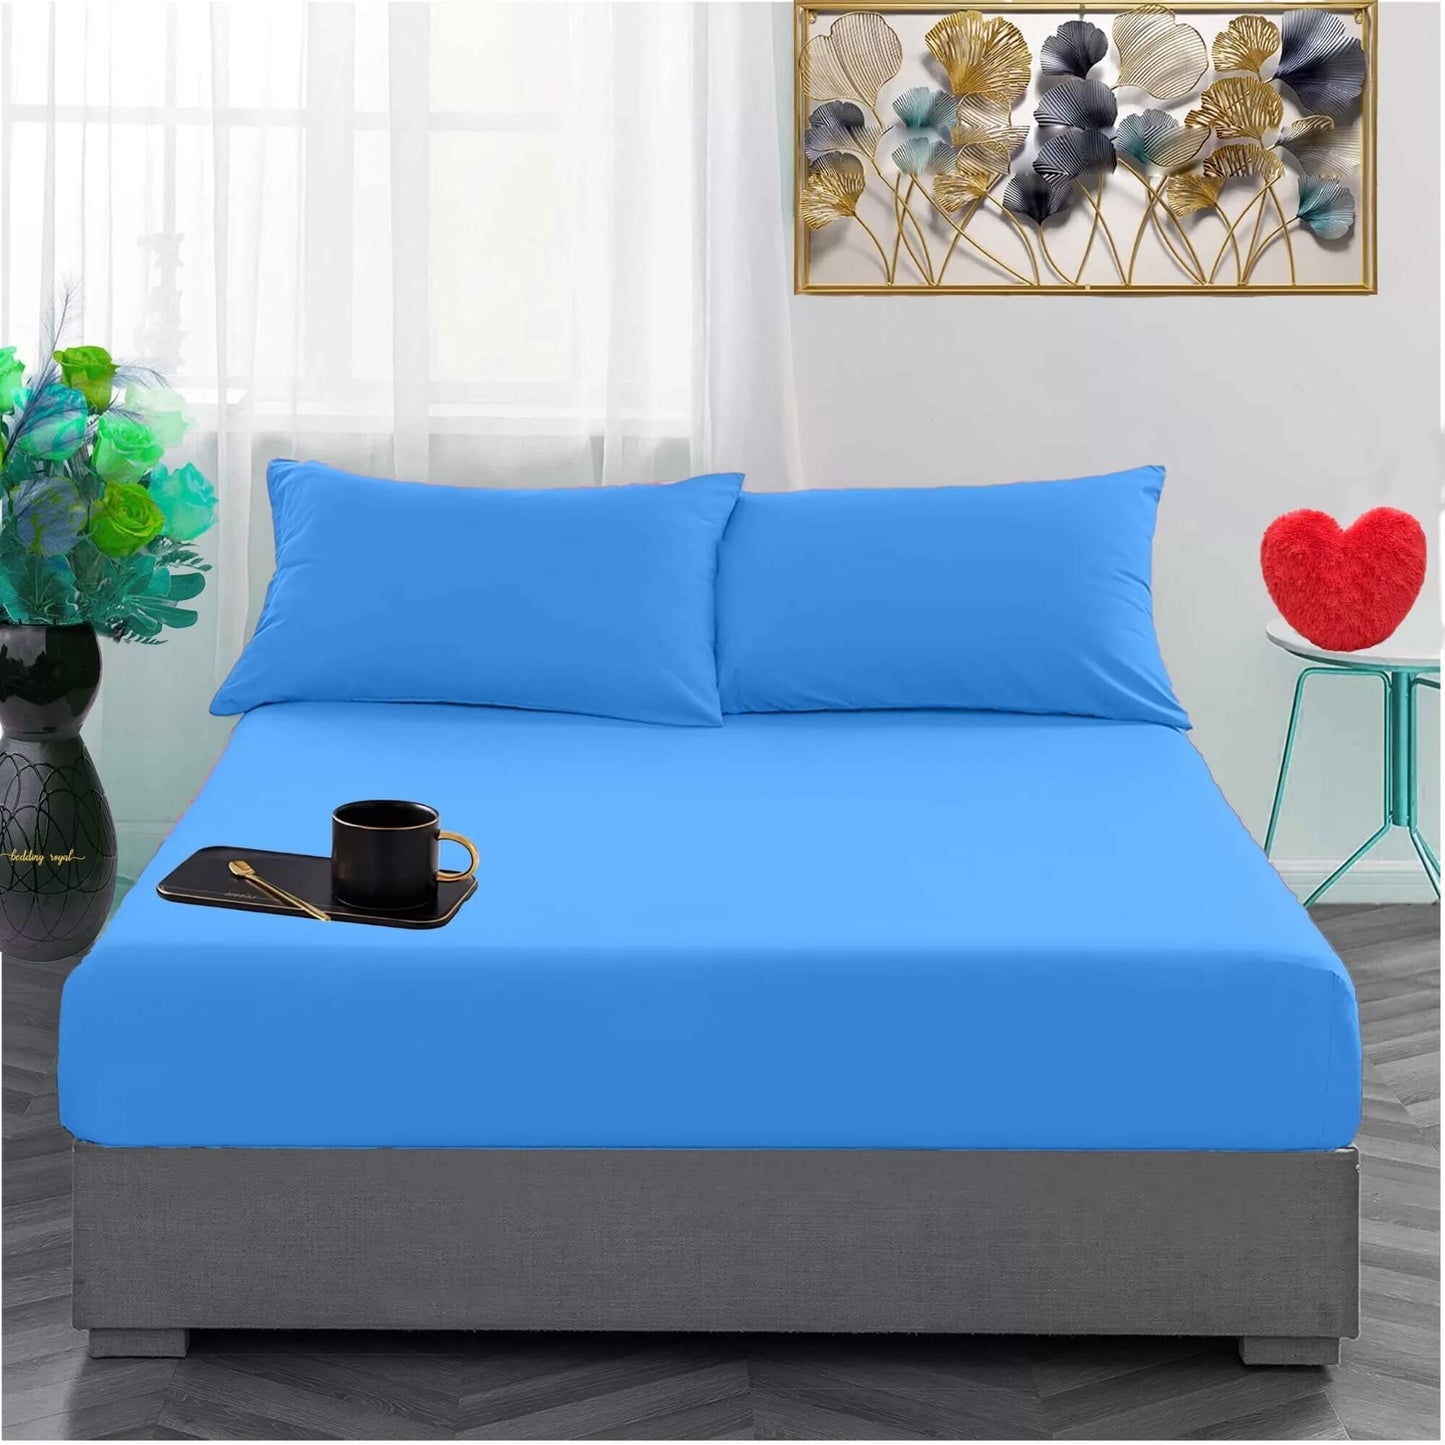 Small Double Fitted Sheet 100% Brushed Cotton Bed Sheet - TheComfortshop.co.ukBed Sheets0721718977346thecomfortshopTheComfortshop.co.ukFlannelette FIT Blue 4FT-1Blue4FT Small DoubleSmall Double Fitted Sheet 100% Brushed Cotton Bed Sheet - TheComfortshop.co.uk